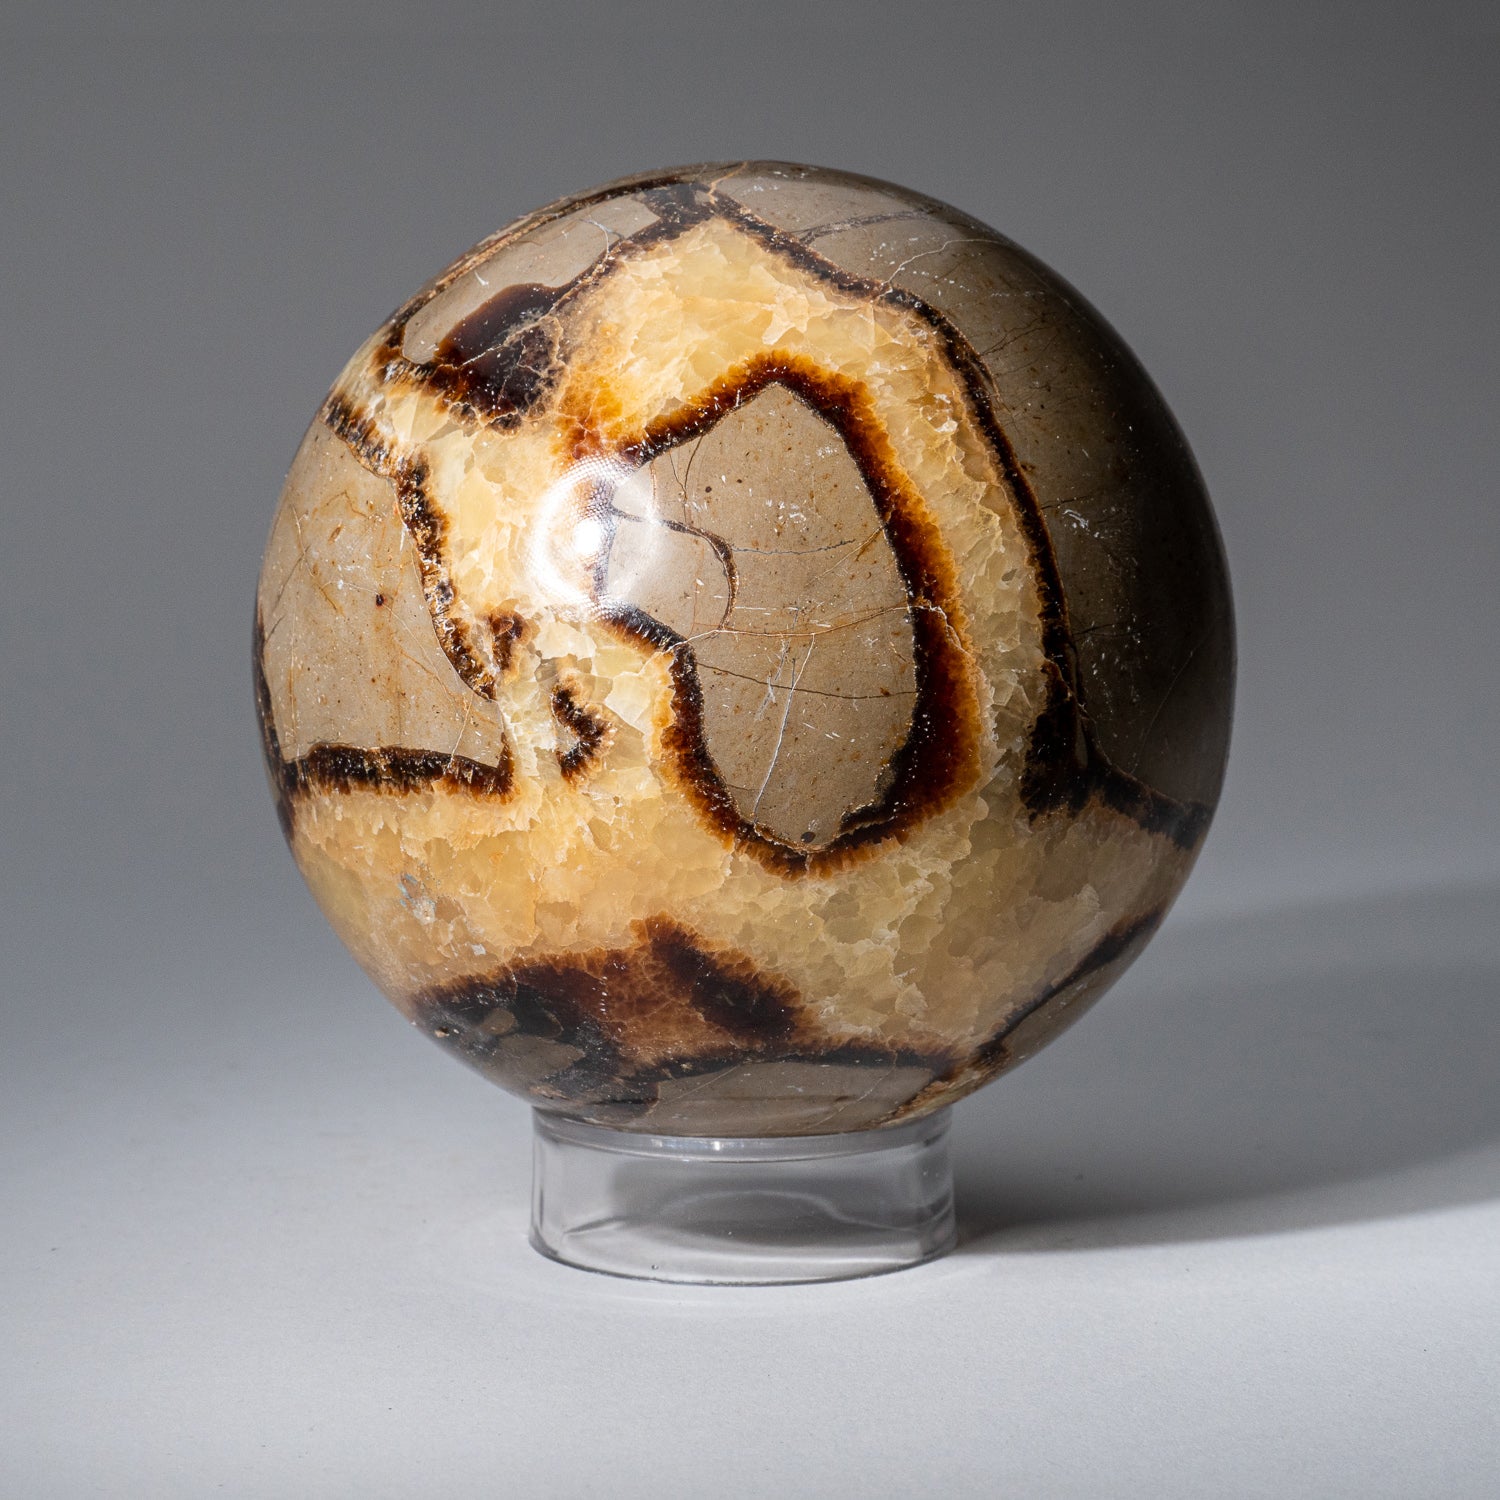 Genuine Polished Septarian Sphere from Madagascar (3.2 lbs)